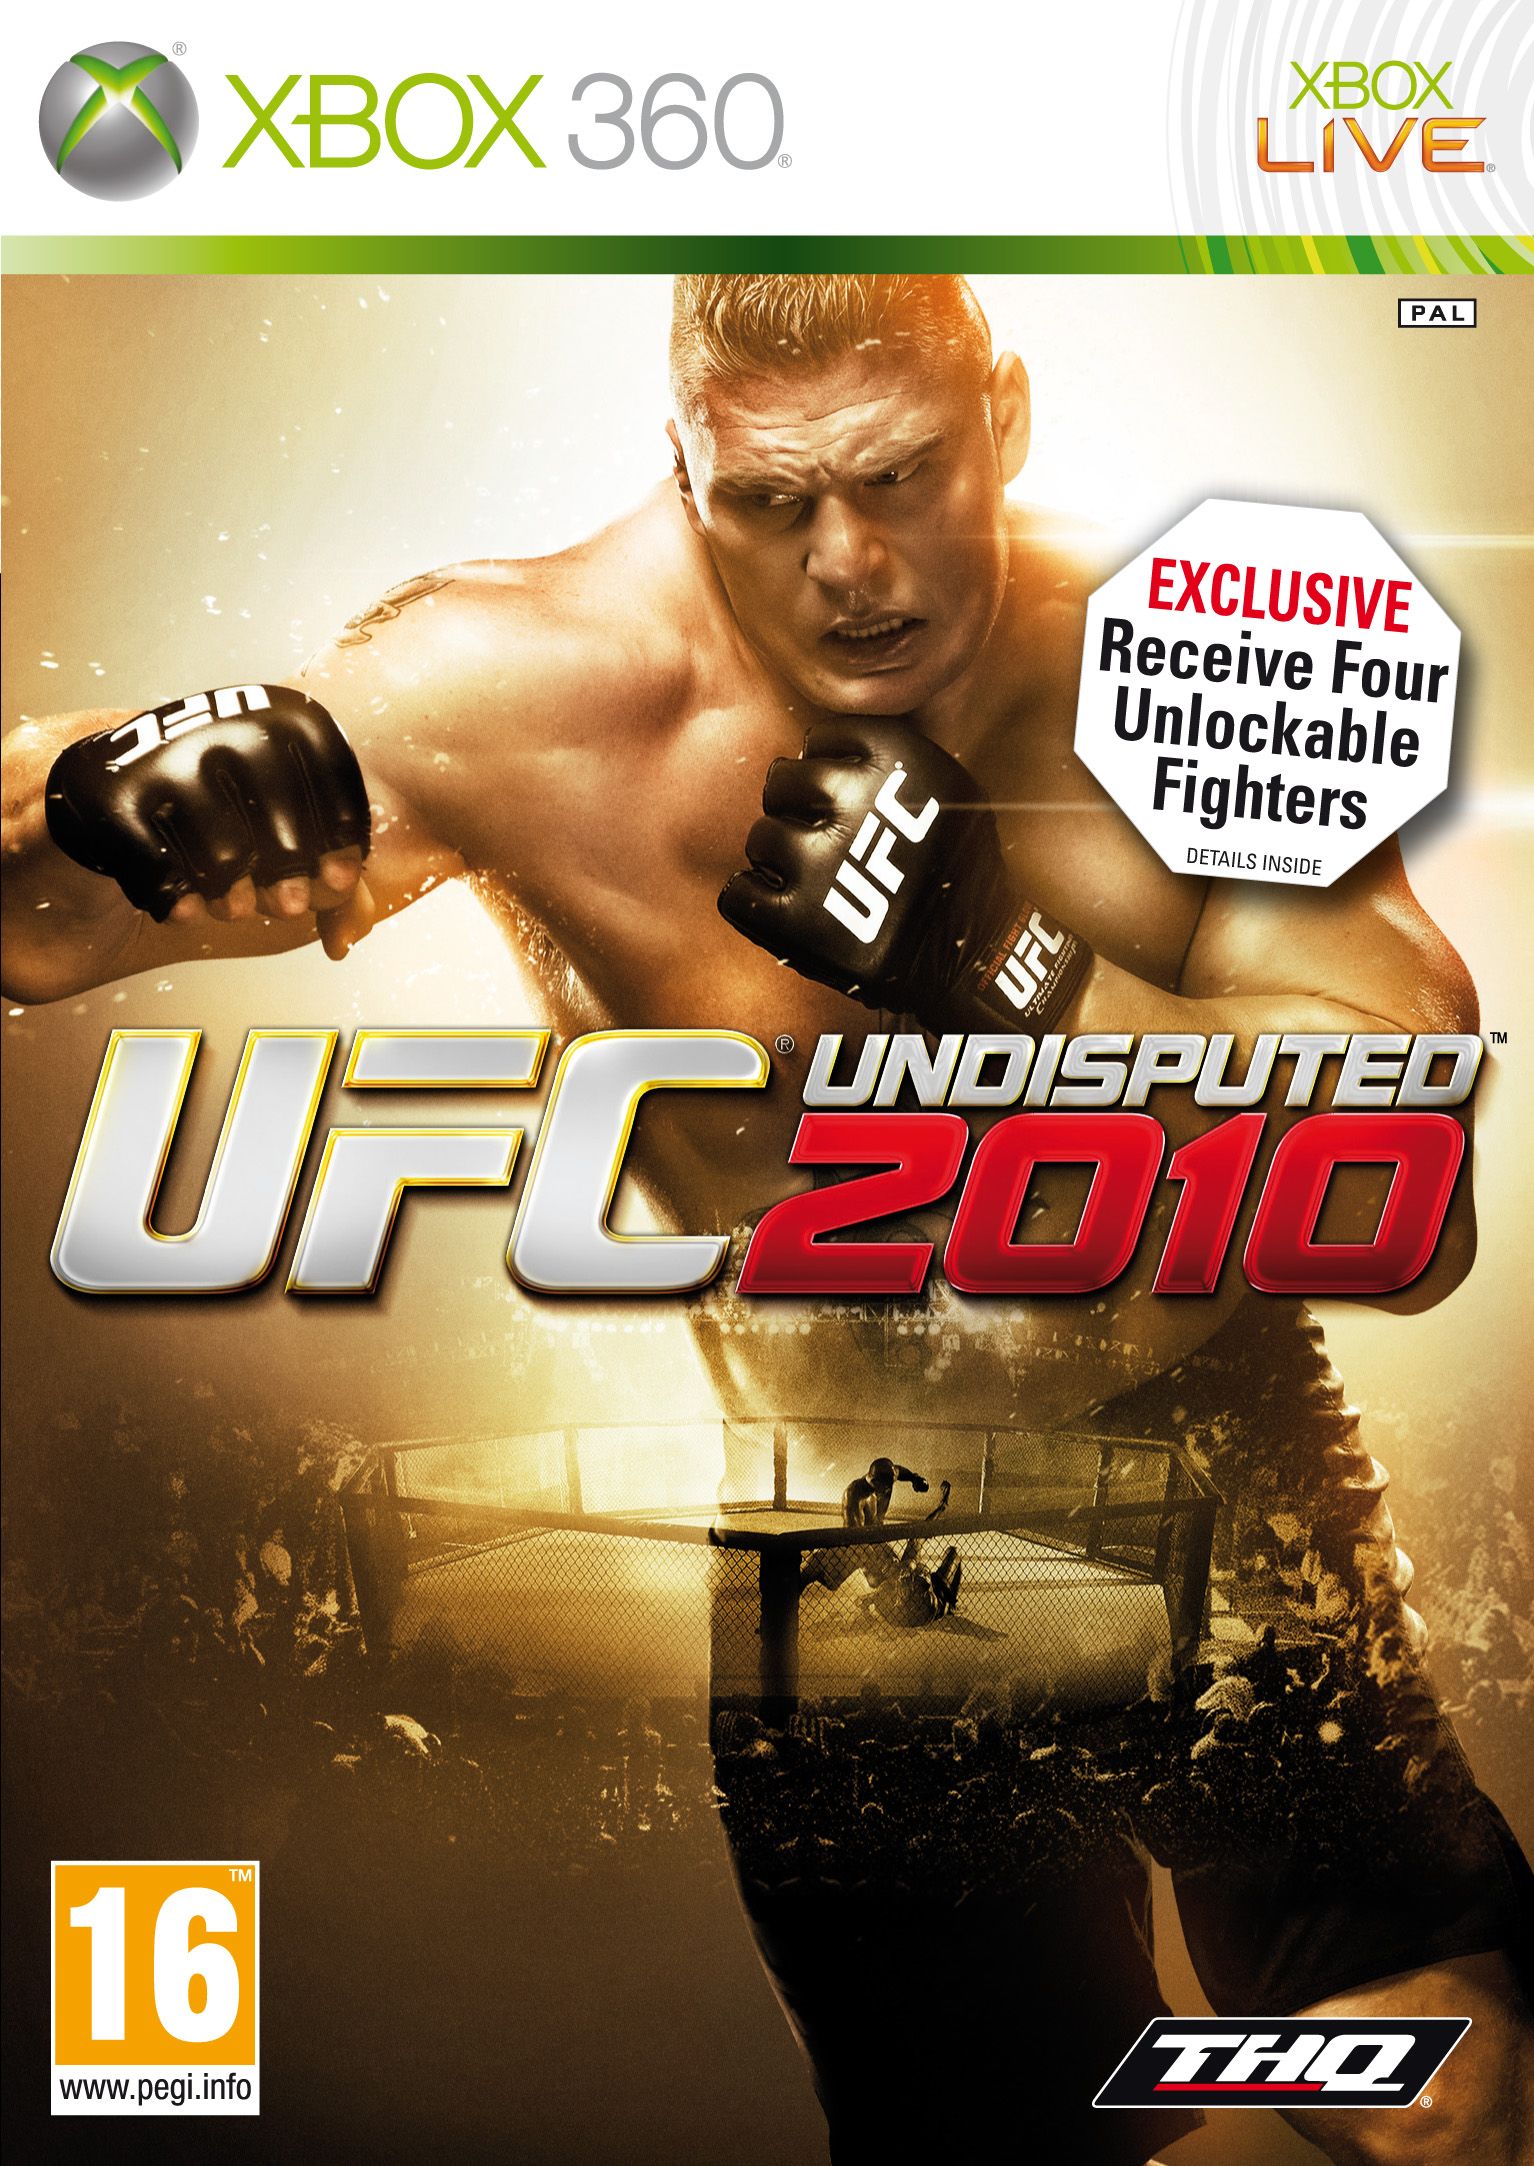 UFC undisputed 2010 limited edition